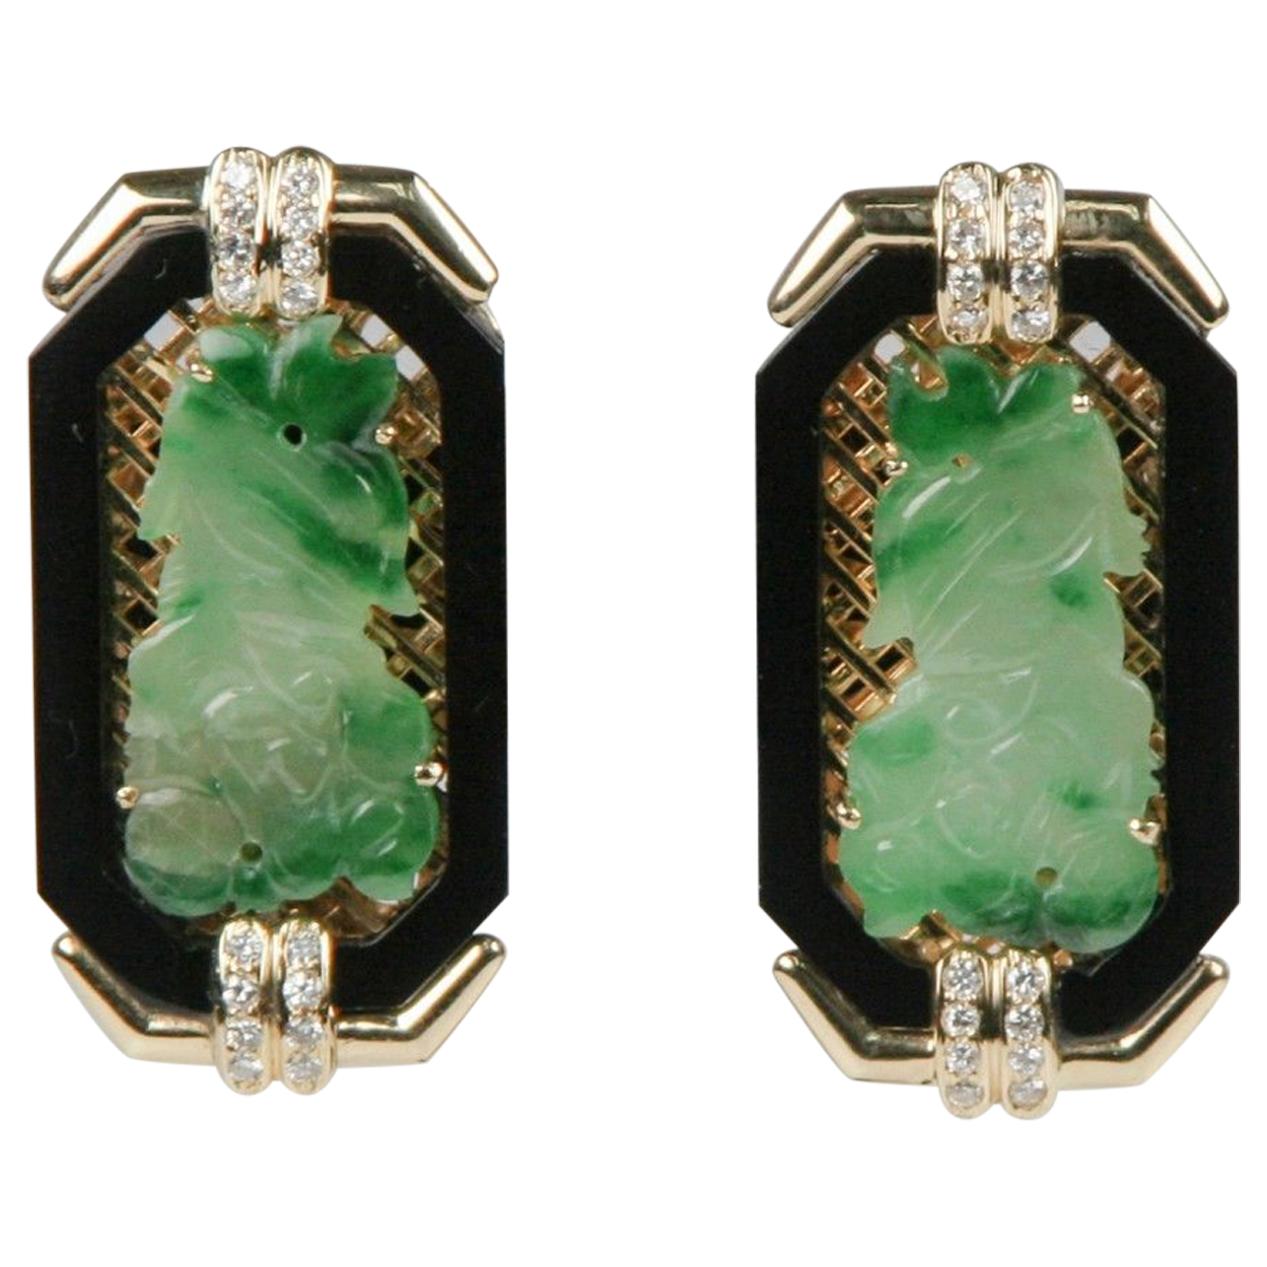 Imperial Jade with Onyx Border and Diamond Accents 18 Karat Yellow Gold Earrings For Sale